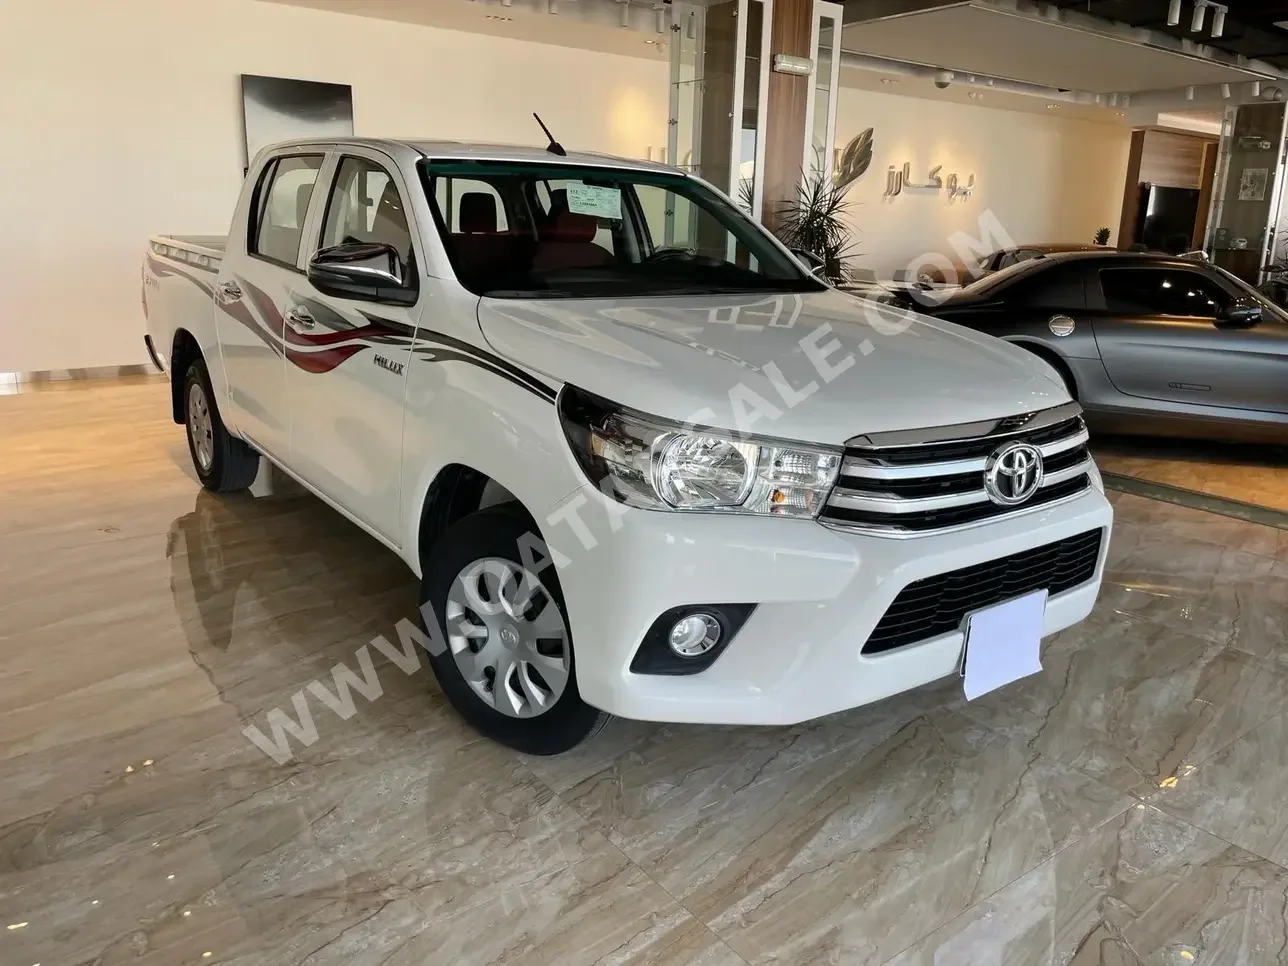 Toyota  Hilux  2020  Automatic  29,000 Km  4 Cylinder  Four Wheel Drive (4WD)  Pick Up  White